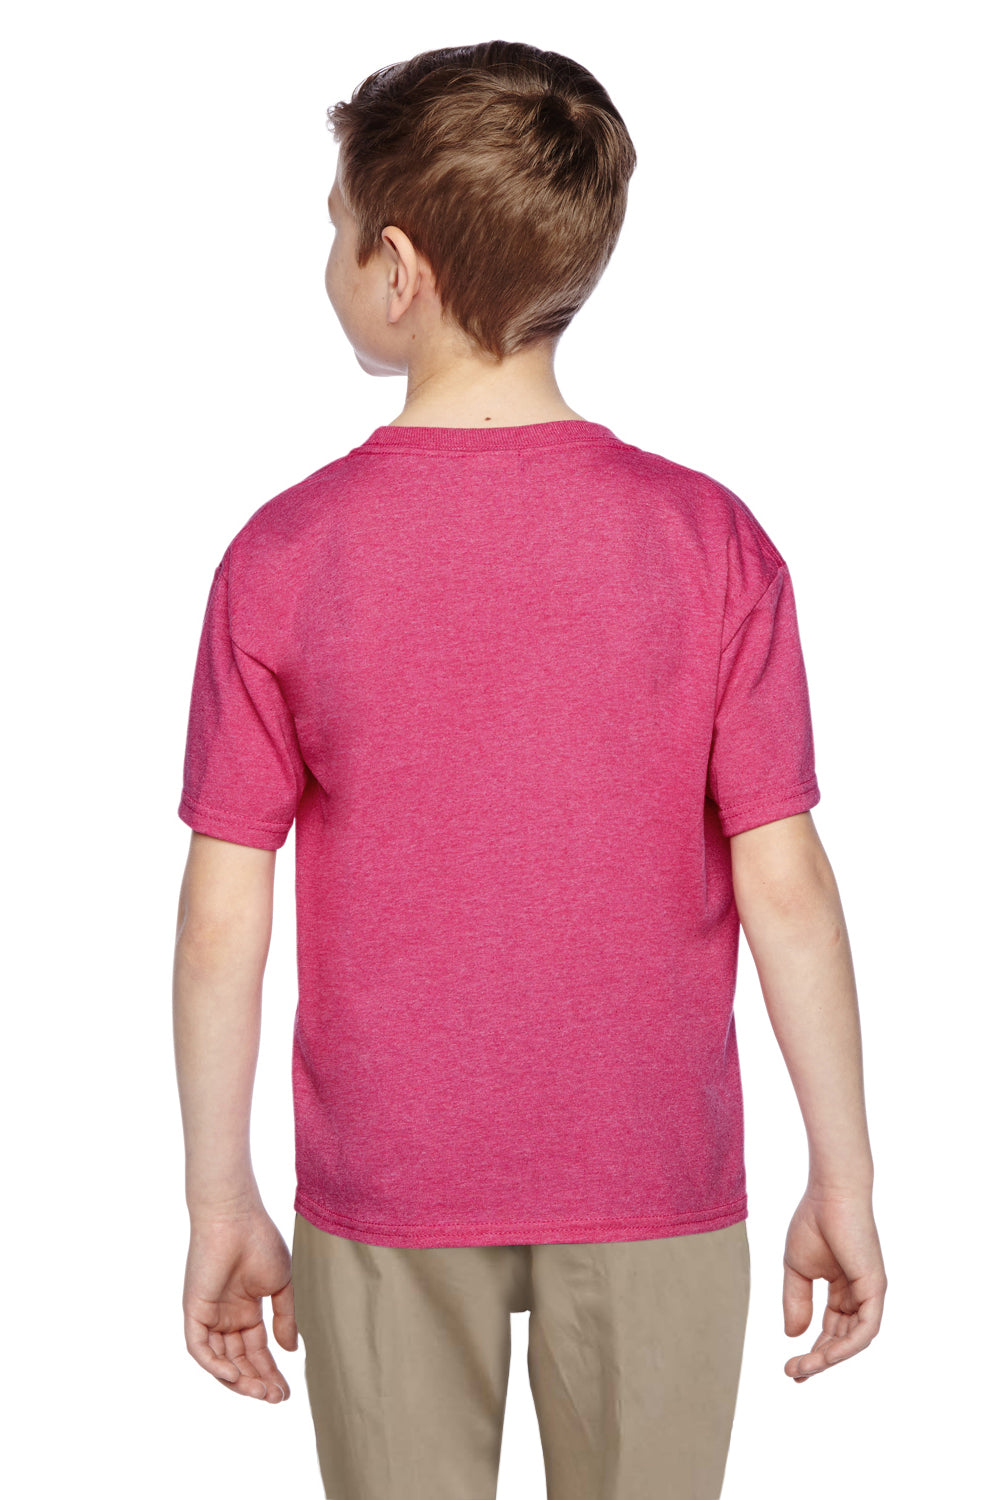 Fruit Of The Loom 3931B Youth HD Jersey Short Sleeve Crewneck T-Shirt Heather Pink Back